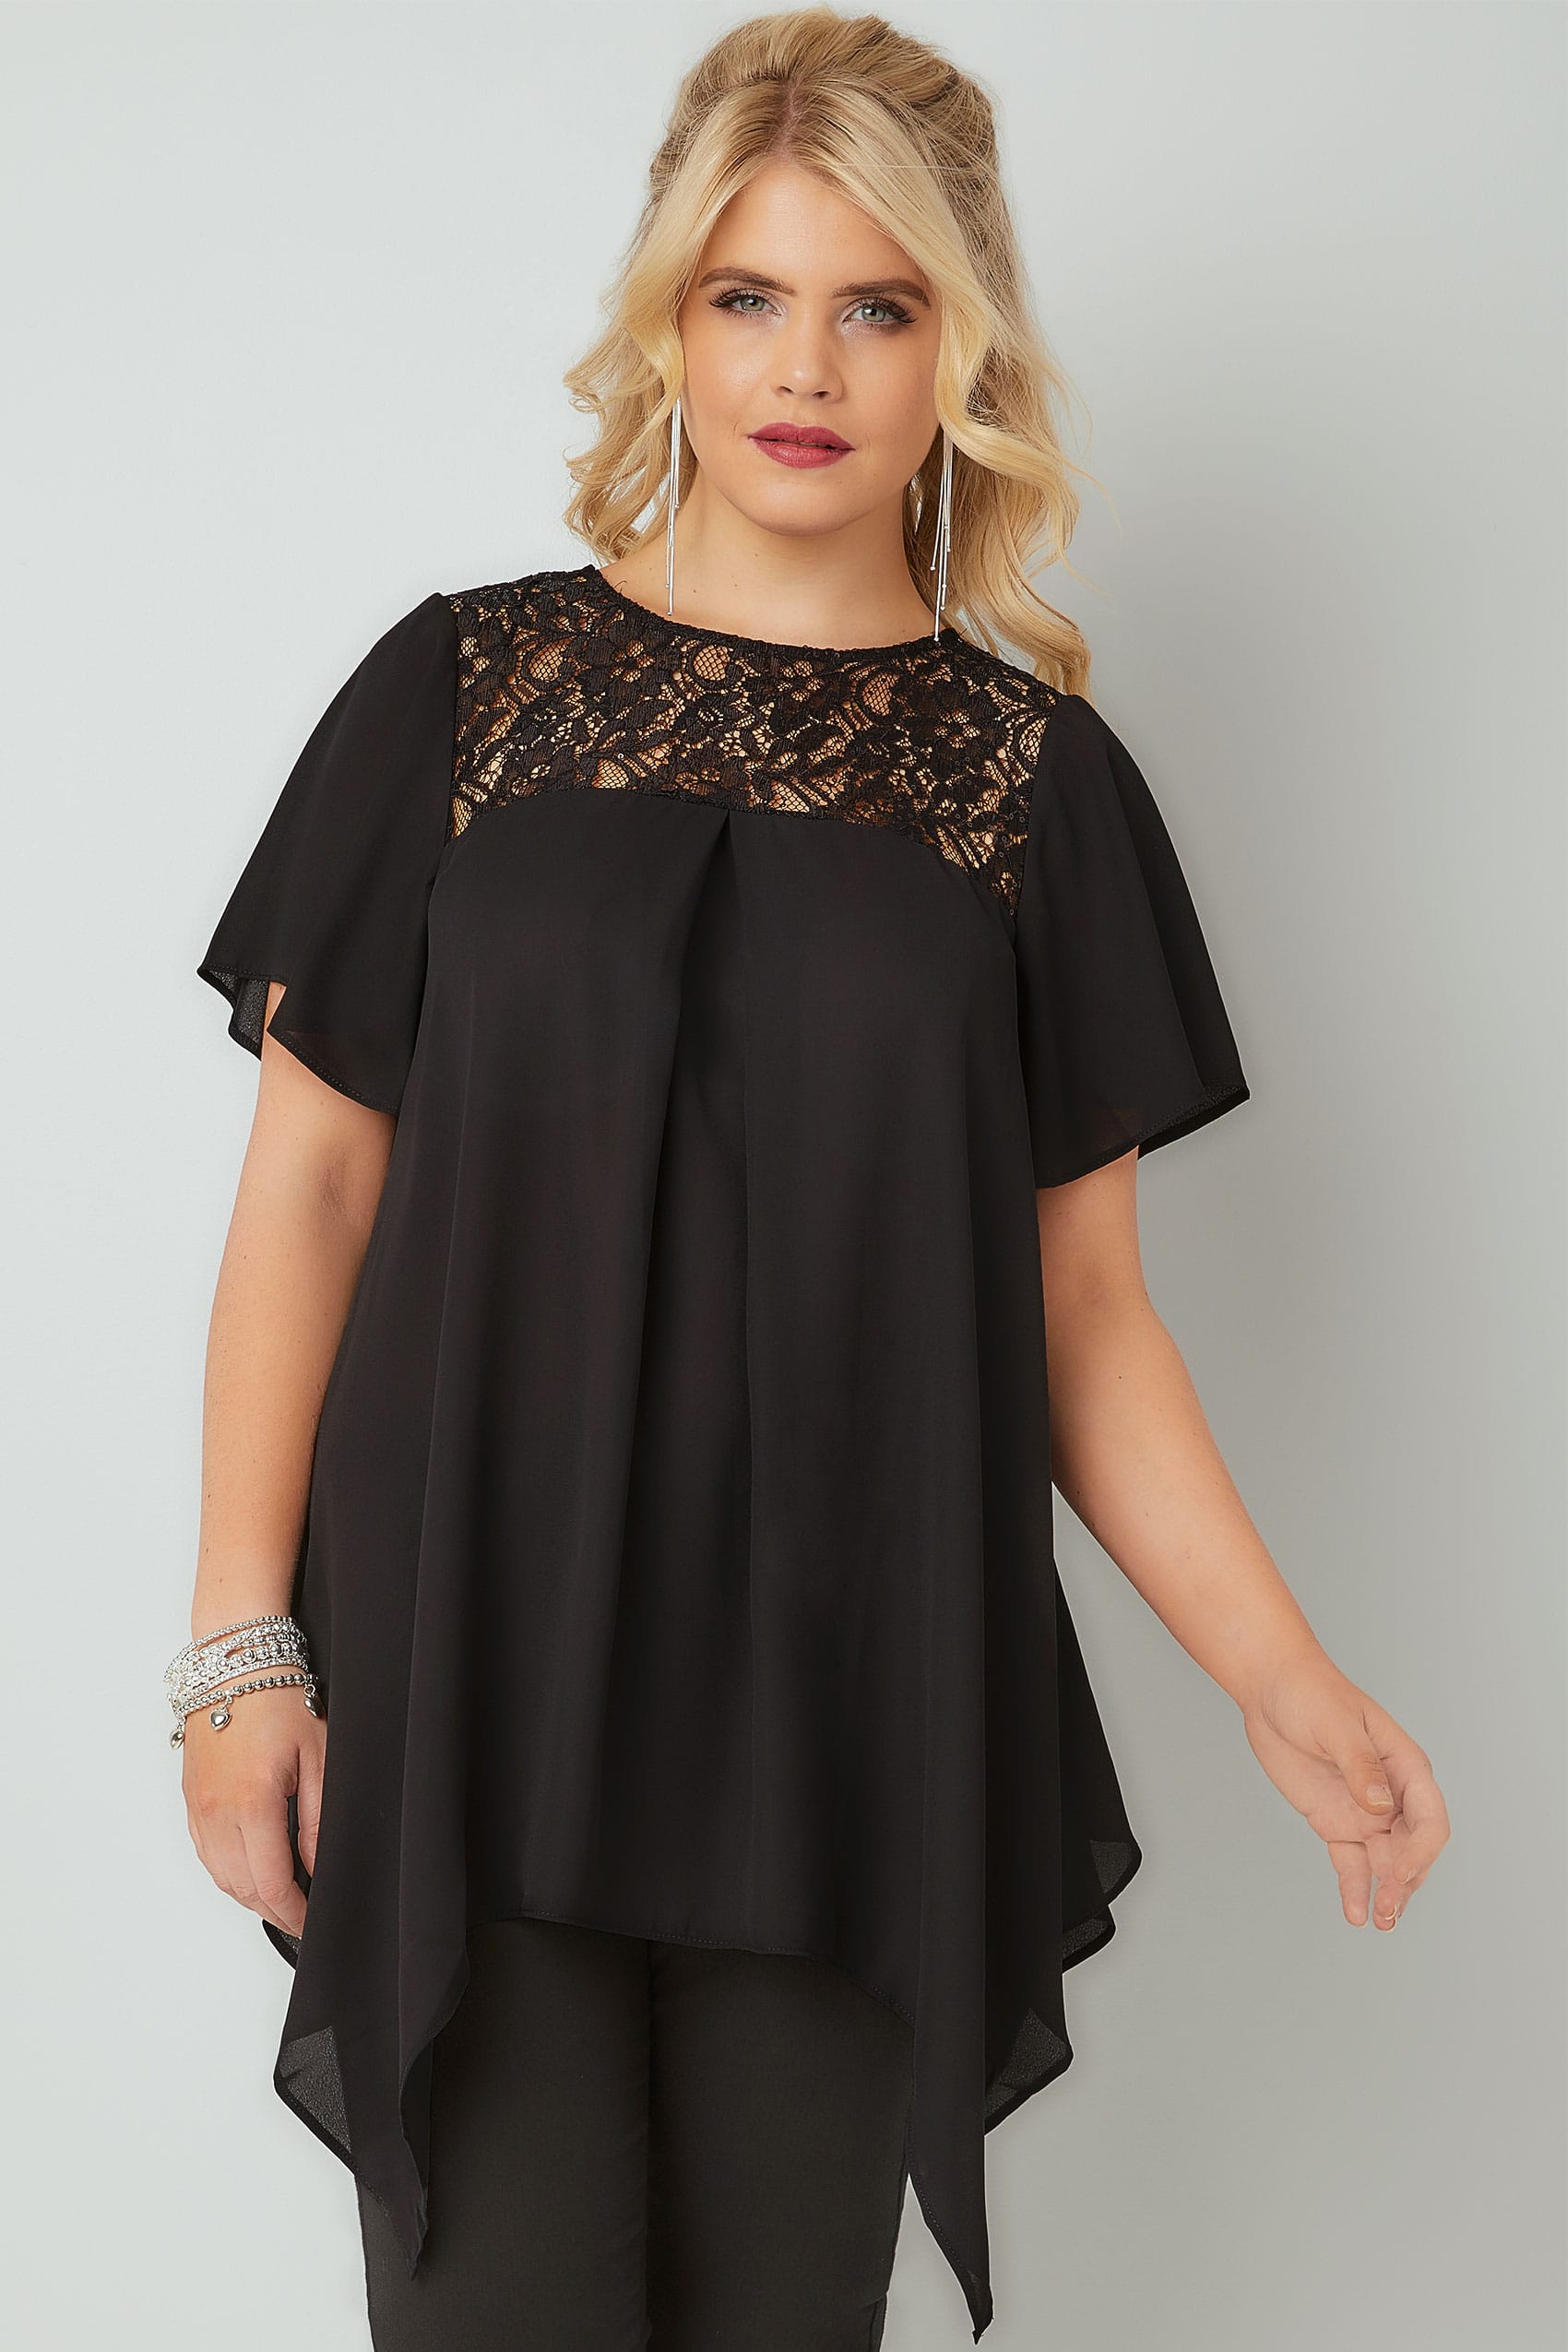 Black Blouse With Lace Sequin Yoke, Plus size 16 to 32